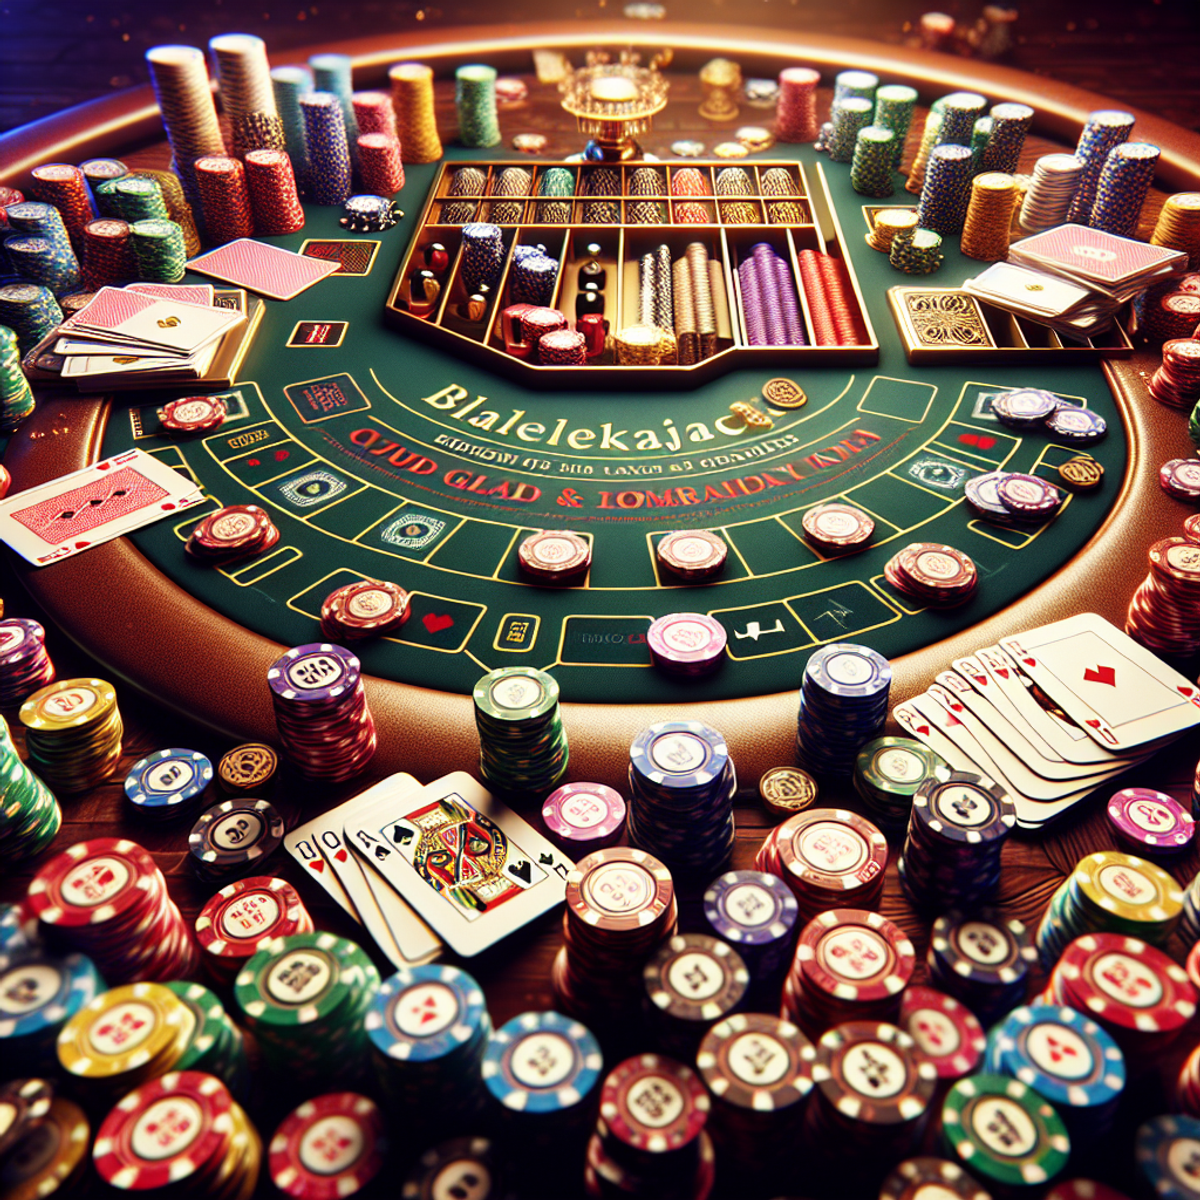 A lively and richly colored blackjack table with cards and poker chips.